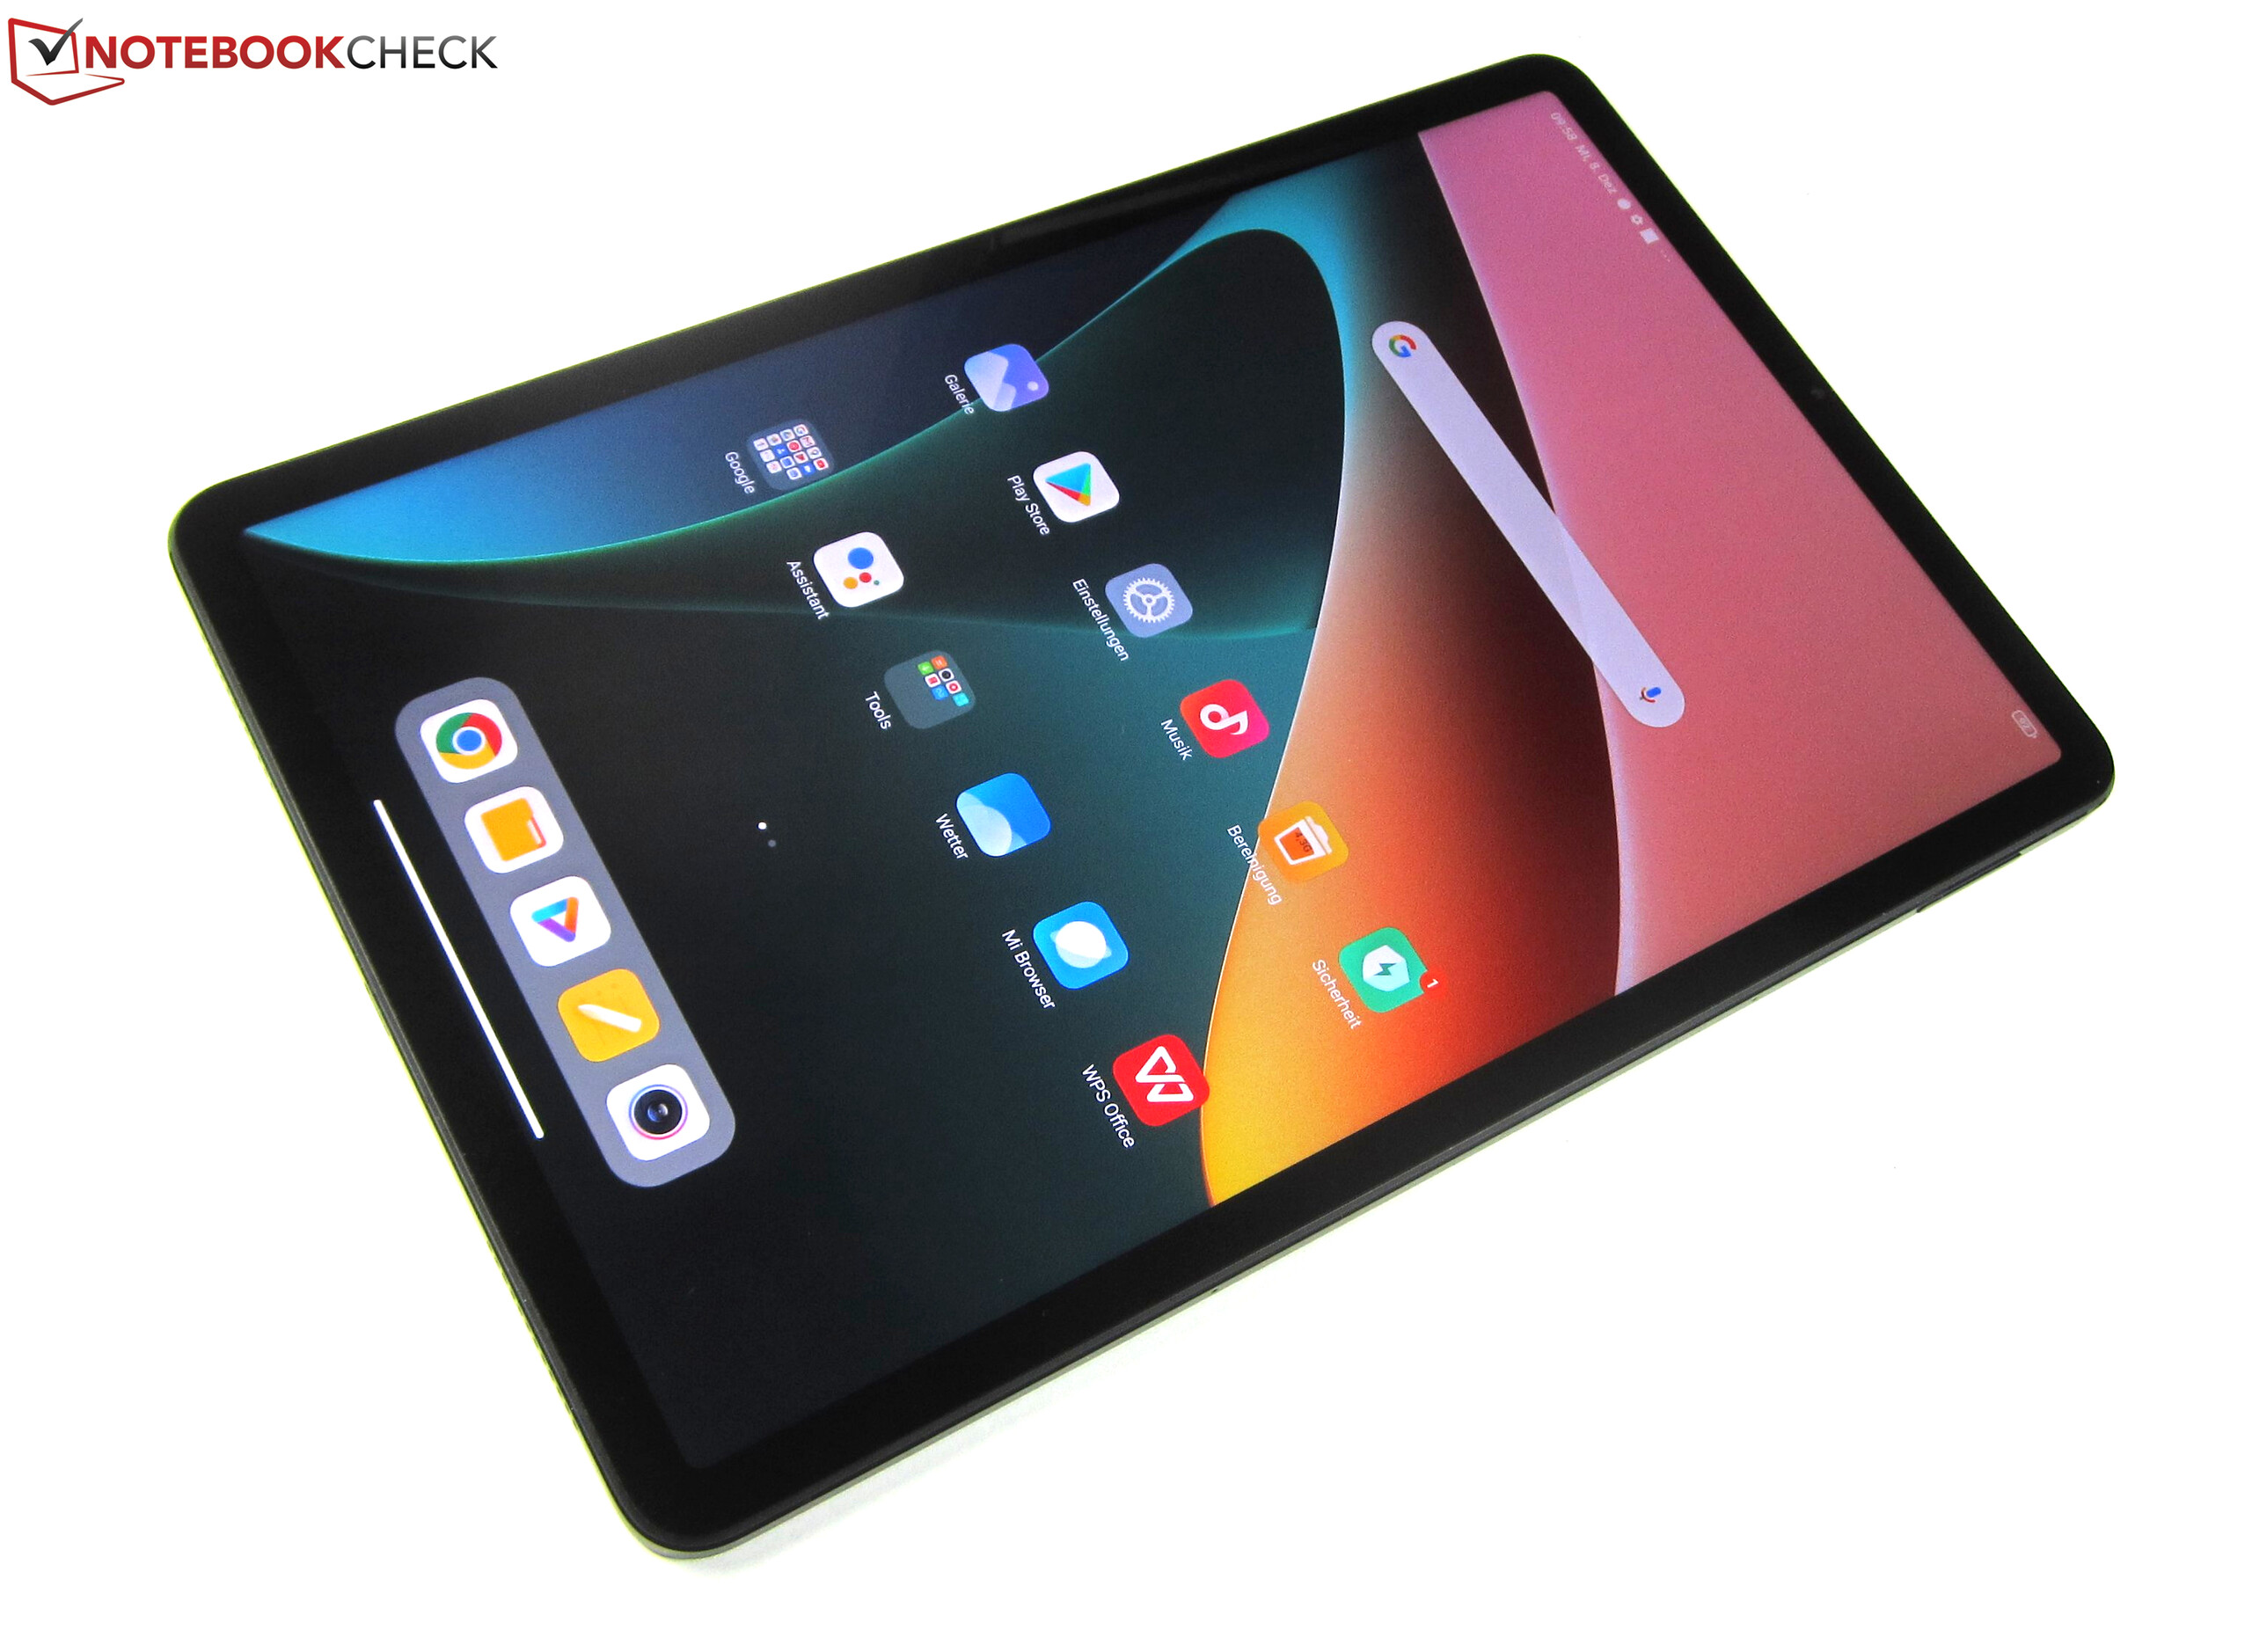 New Xiaomi Redmi Pad SE leak reveals price and more specifications of  upcoming tablet -  News